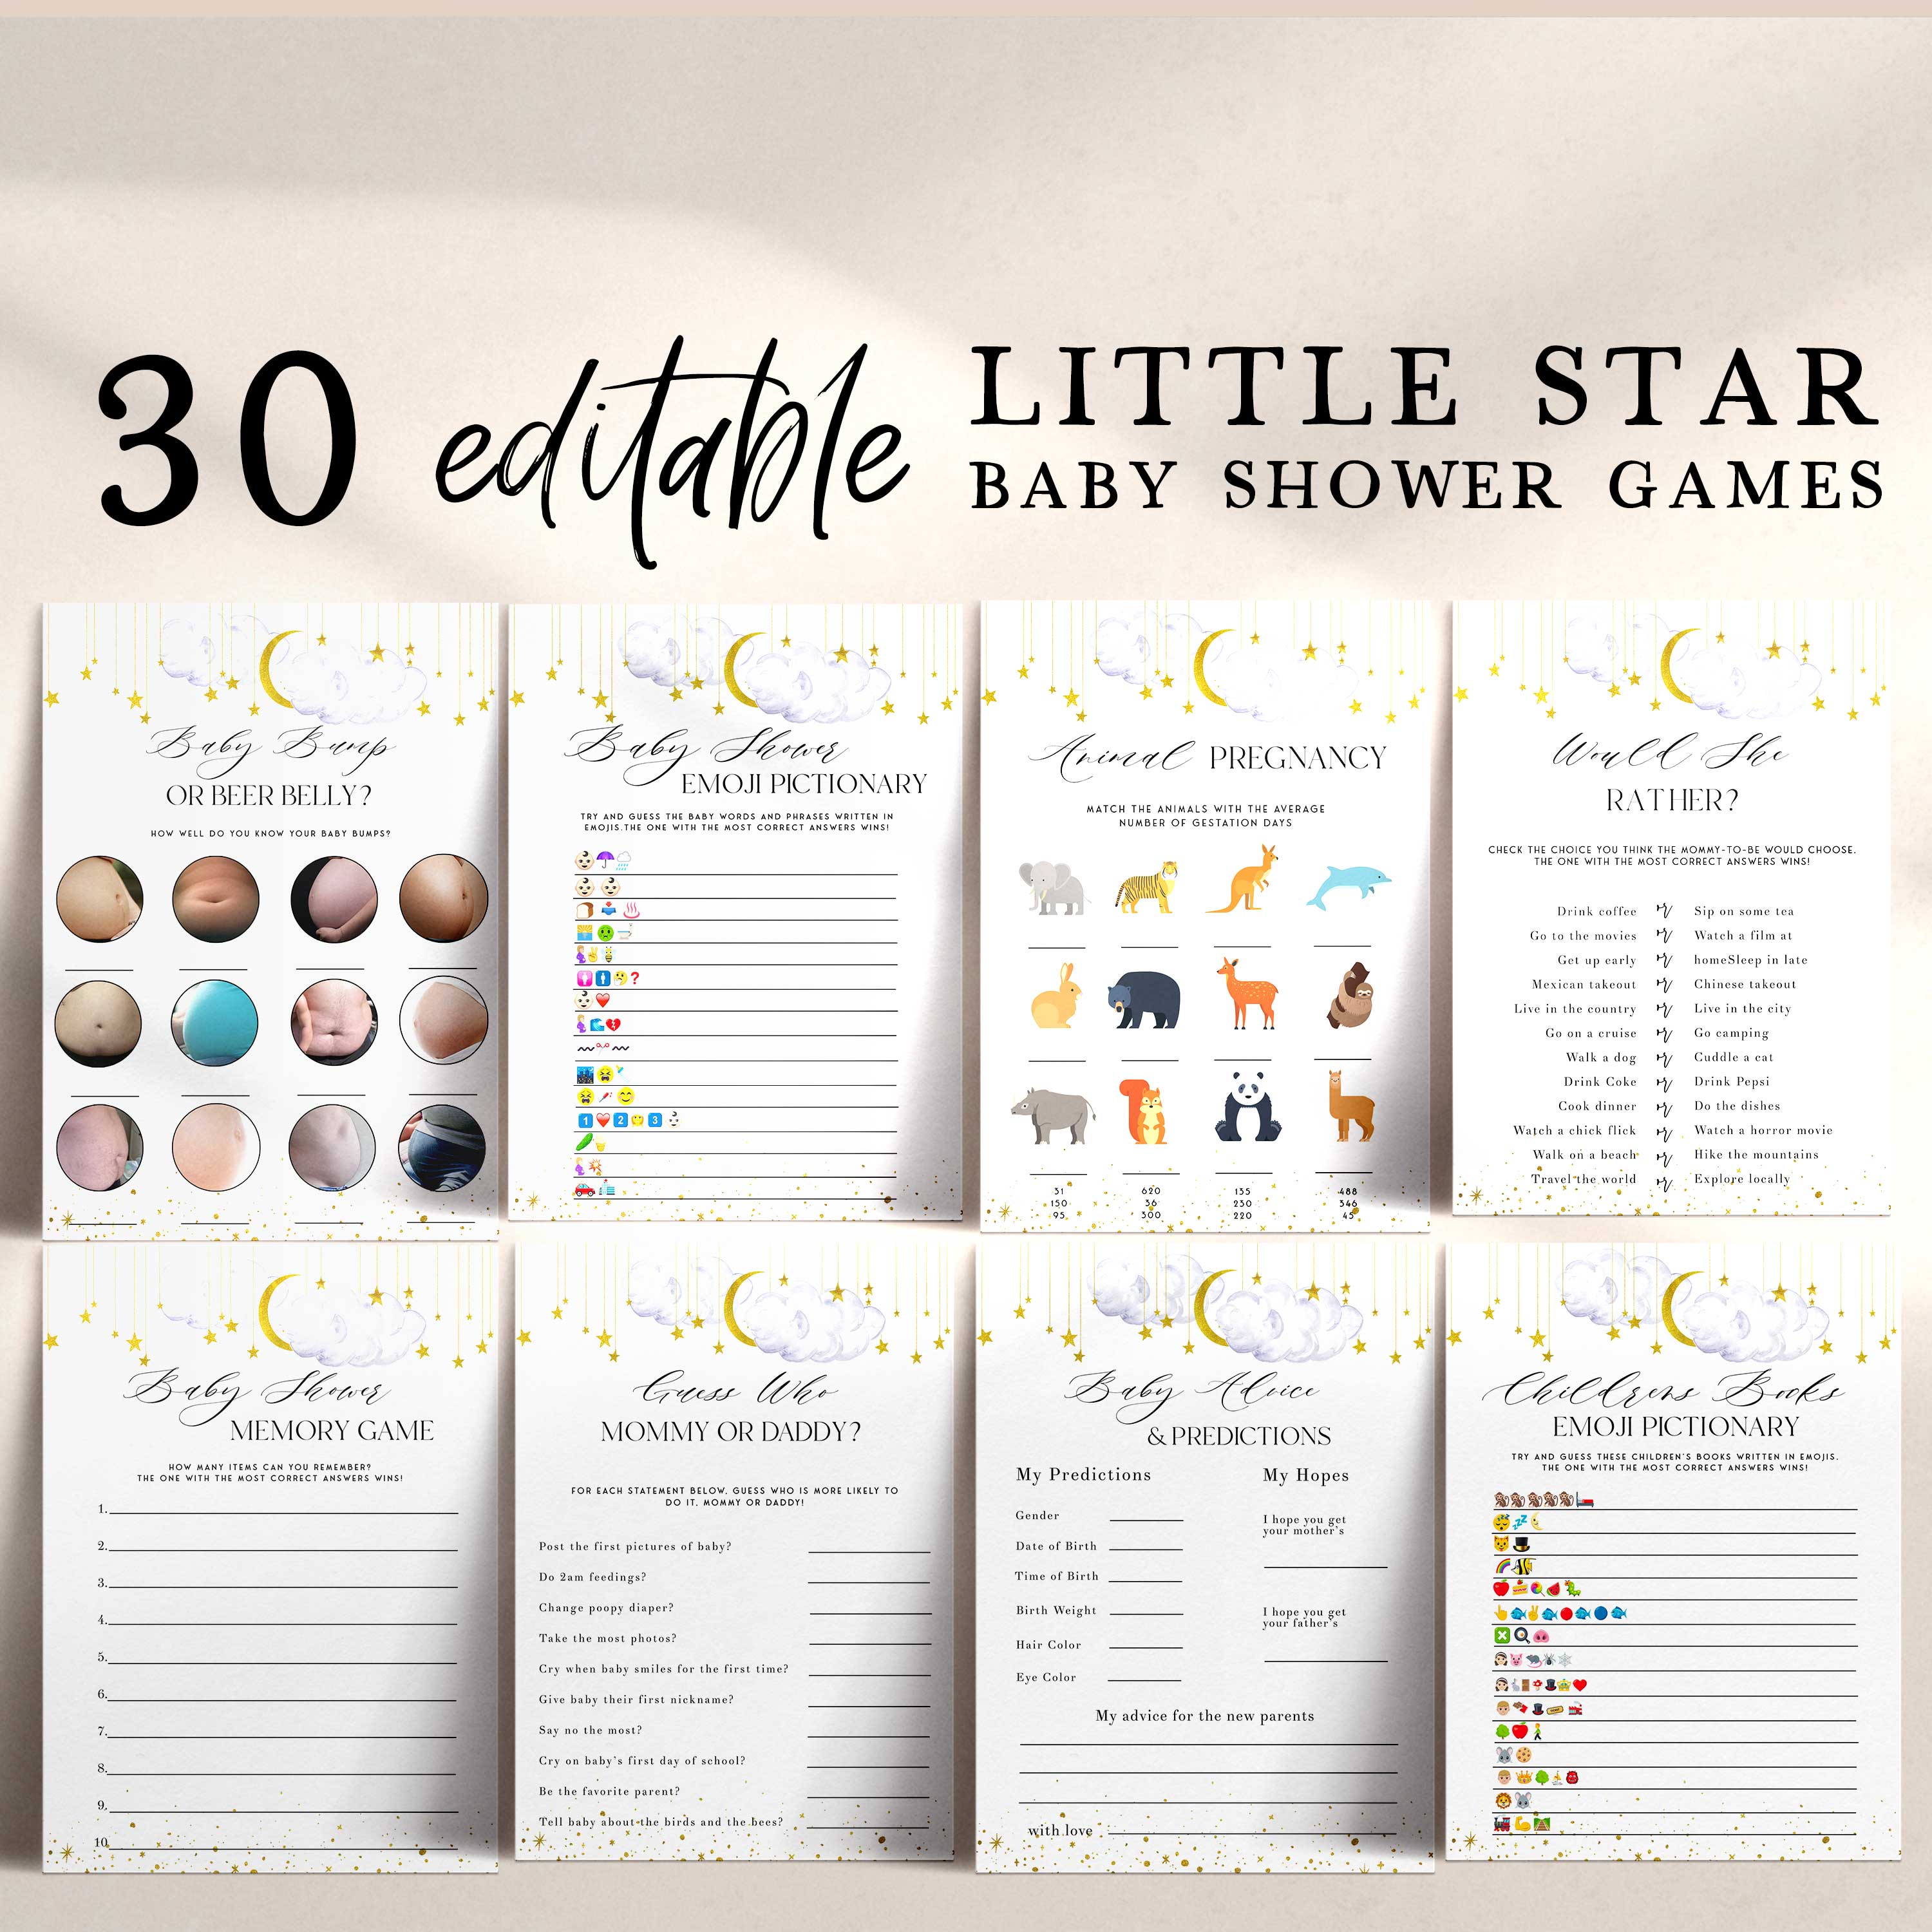 Fully editable and printable 30 baby shower games with a little star design. Perfect for a Twinkle Little Star baby shower themed party